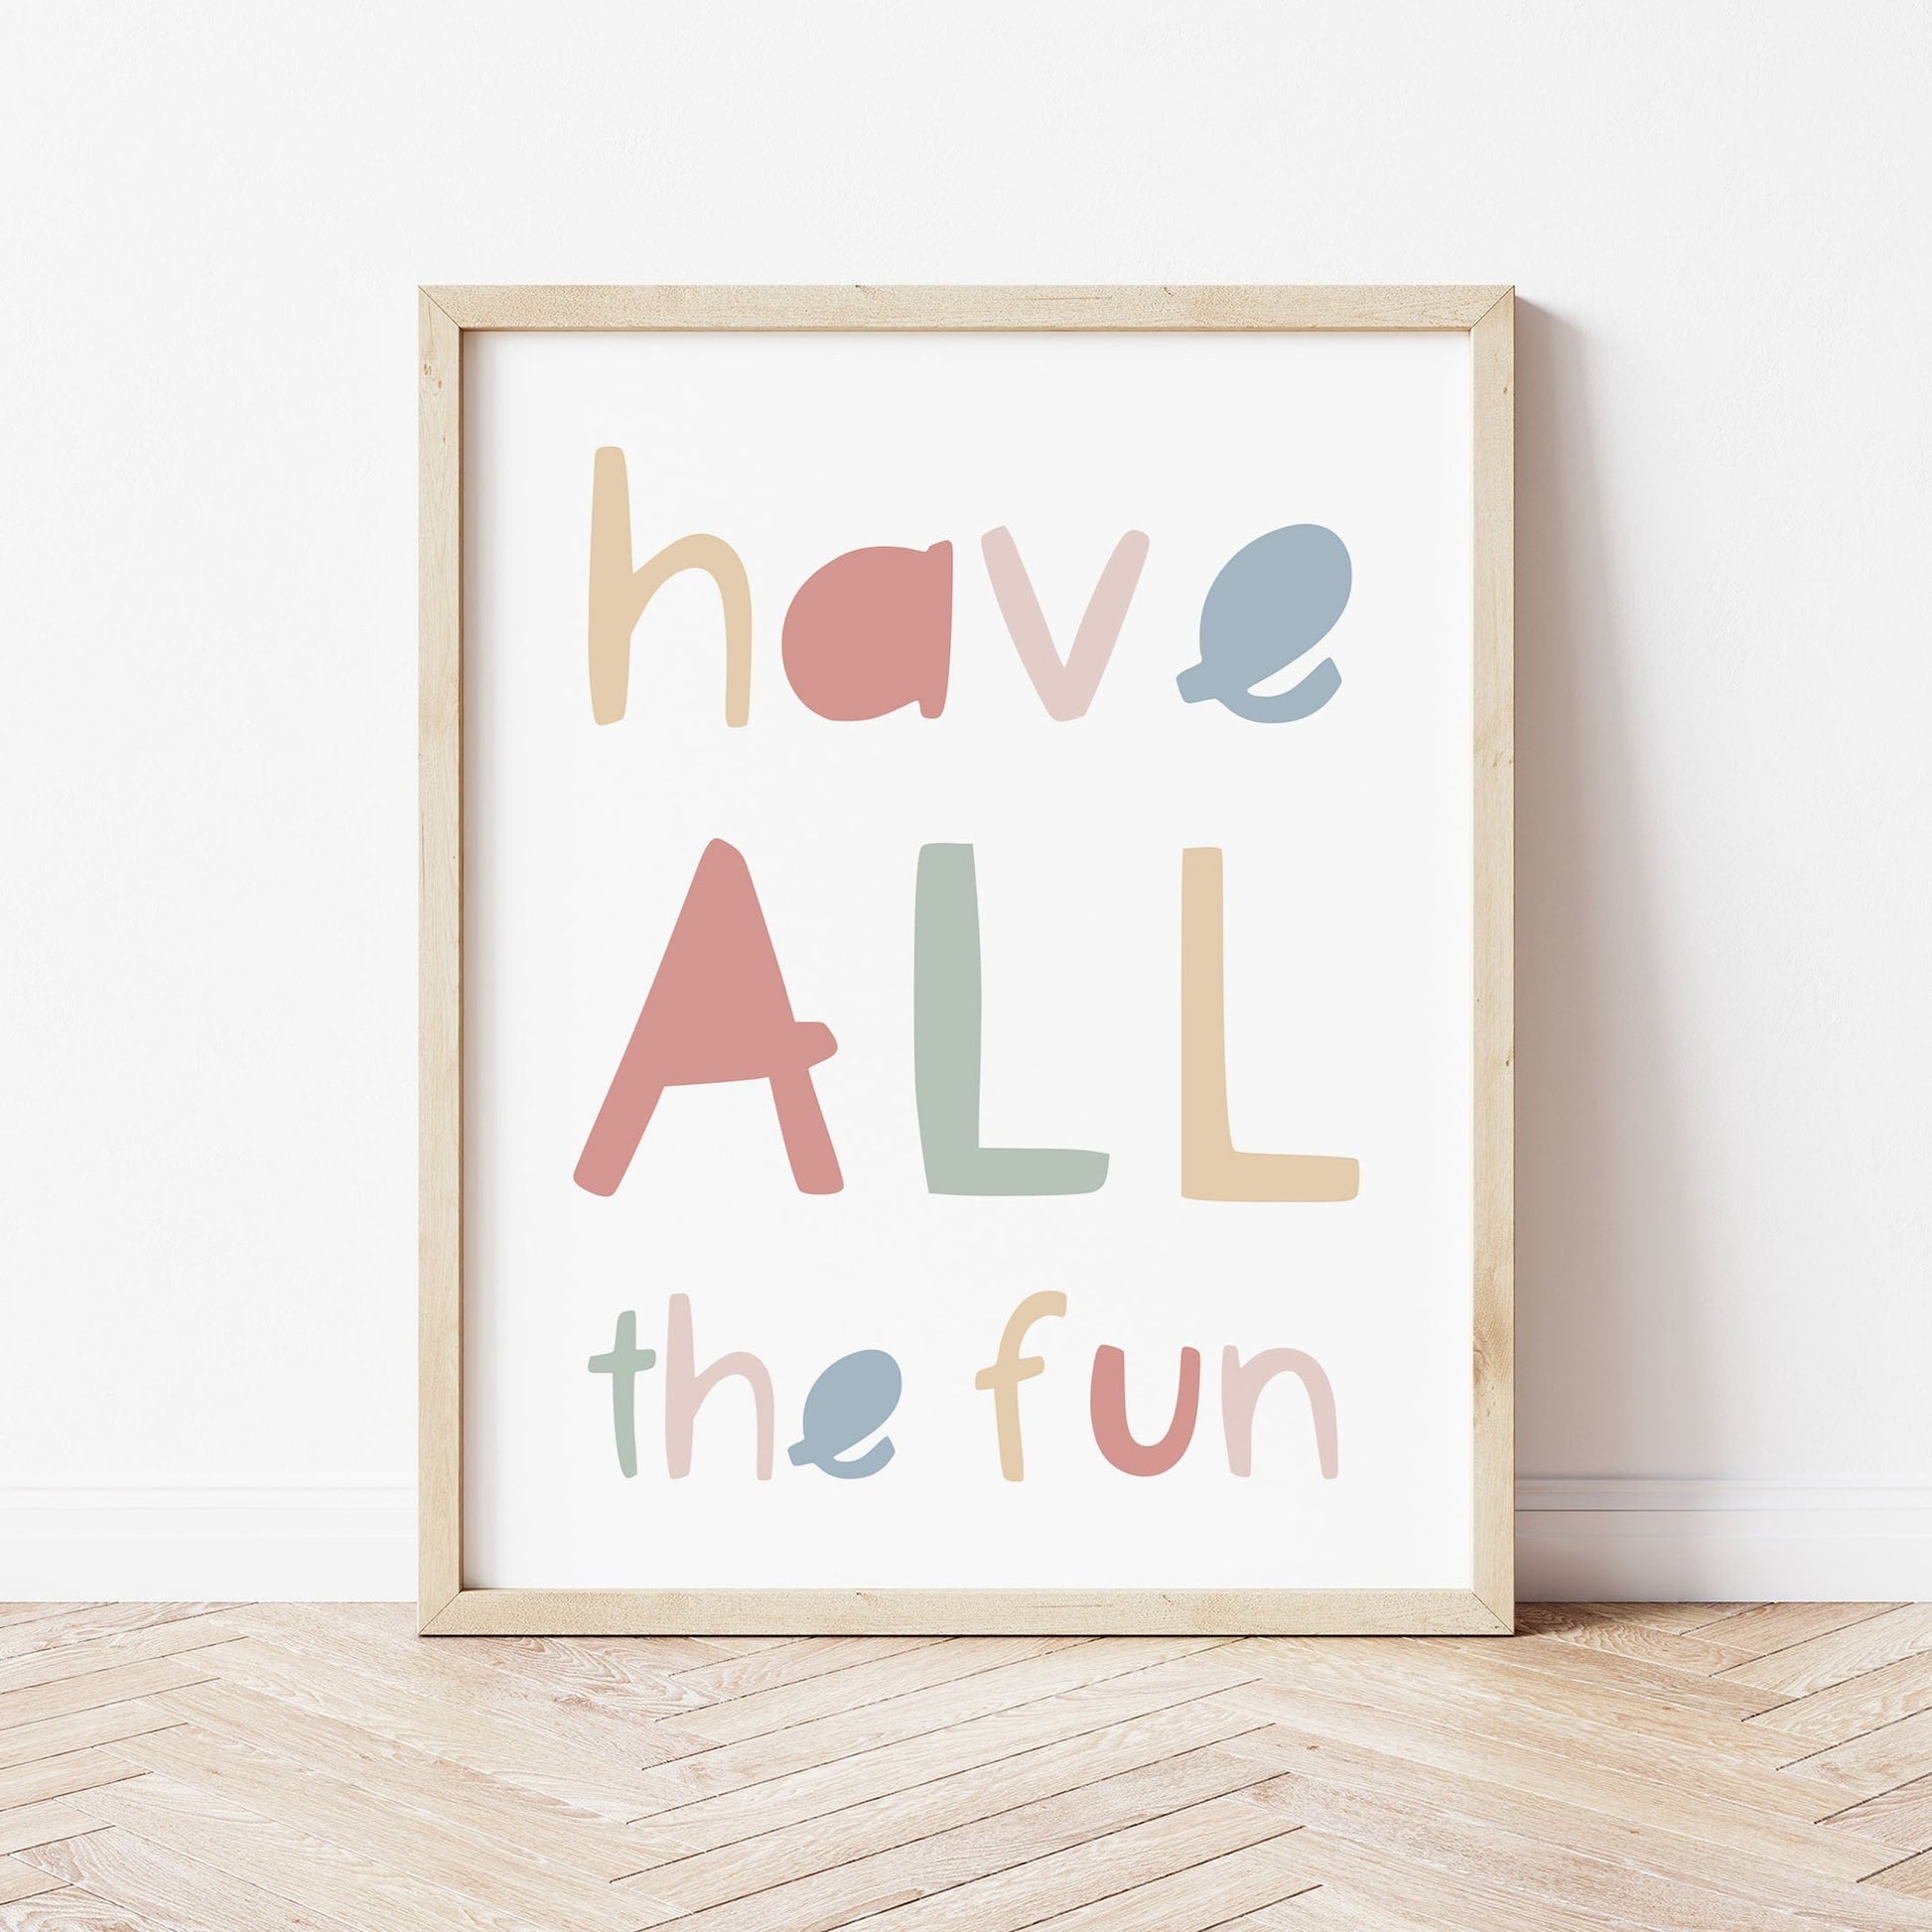 Have All the Fun Print Art Print by The Little Jones (15 Sizes Available)